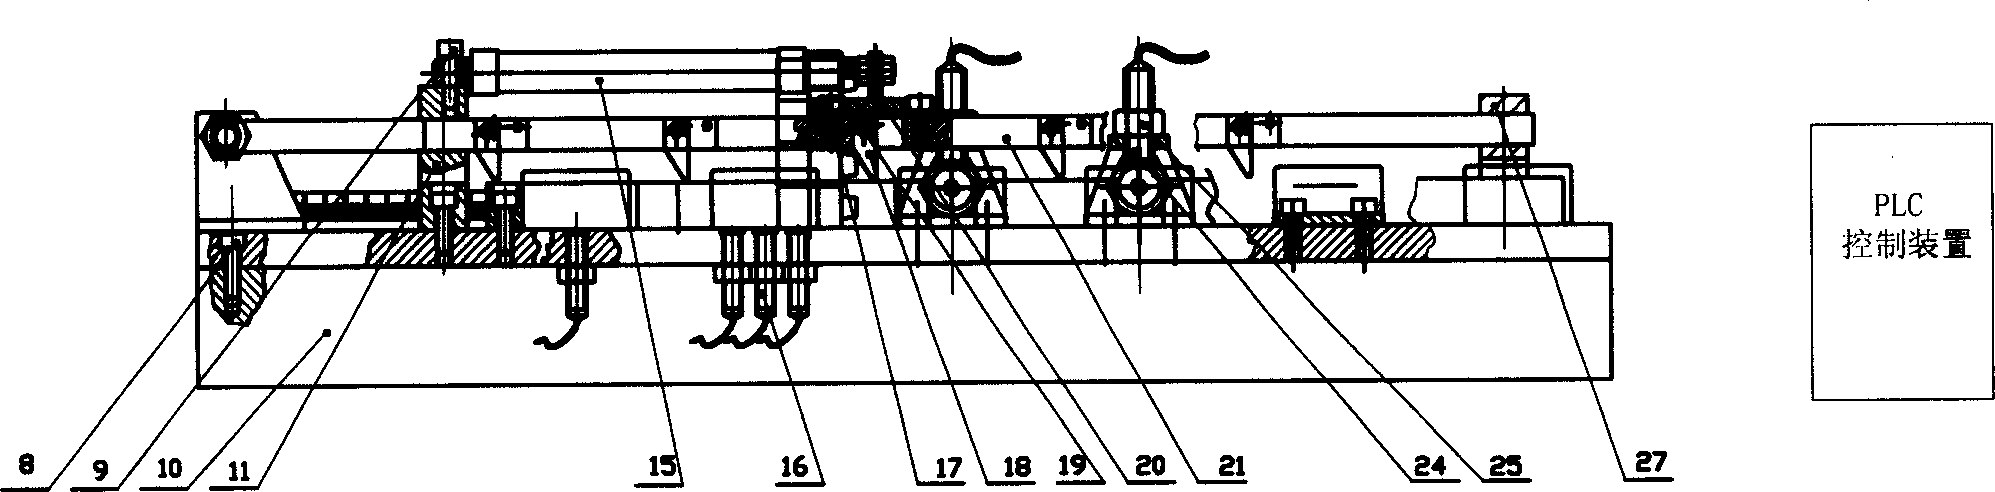 Experimental apparatus of transportation automation line capable of detection and classification